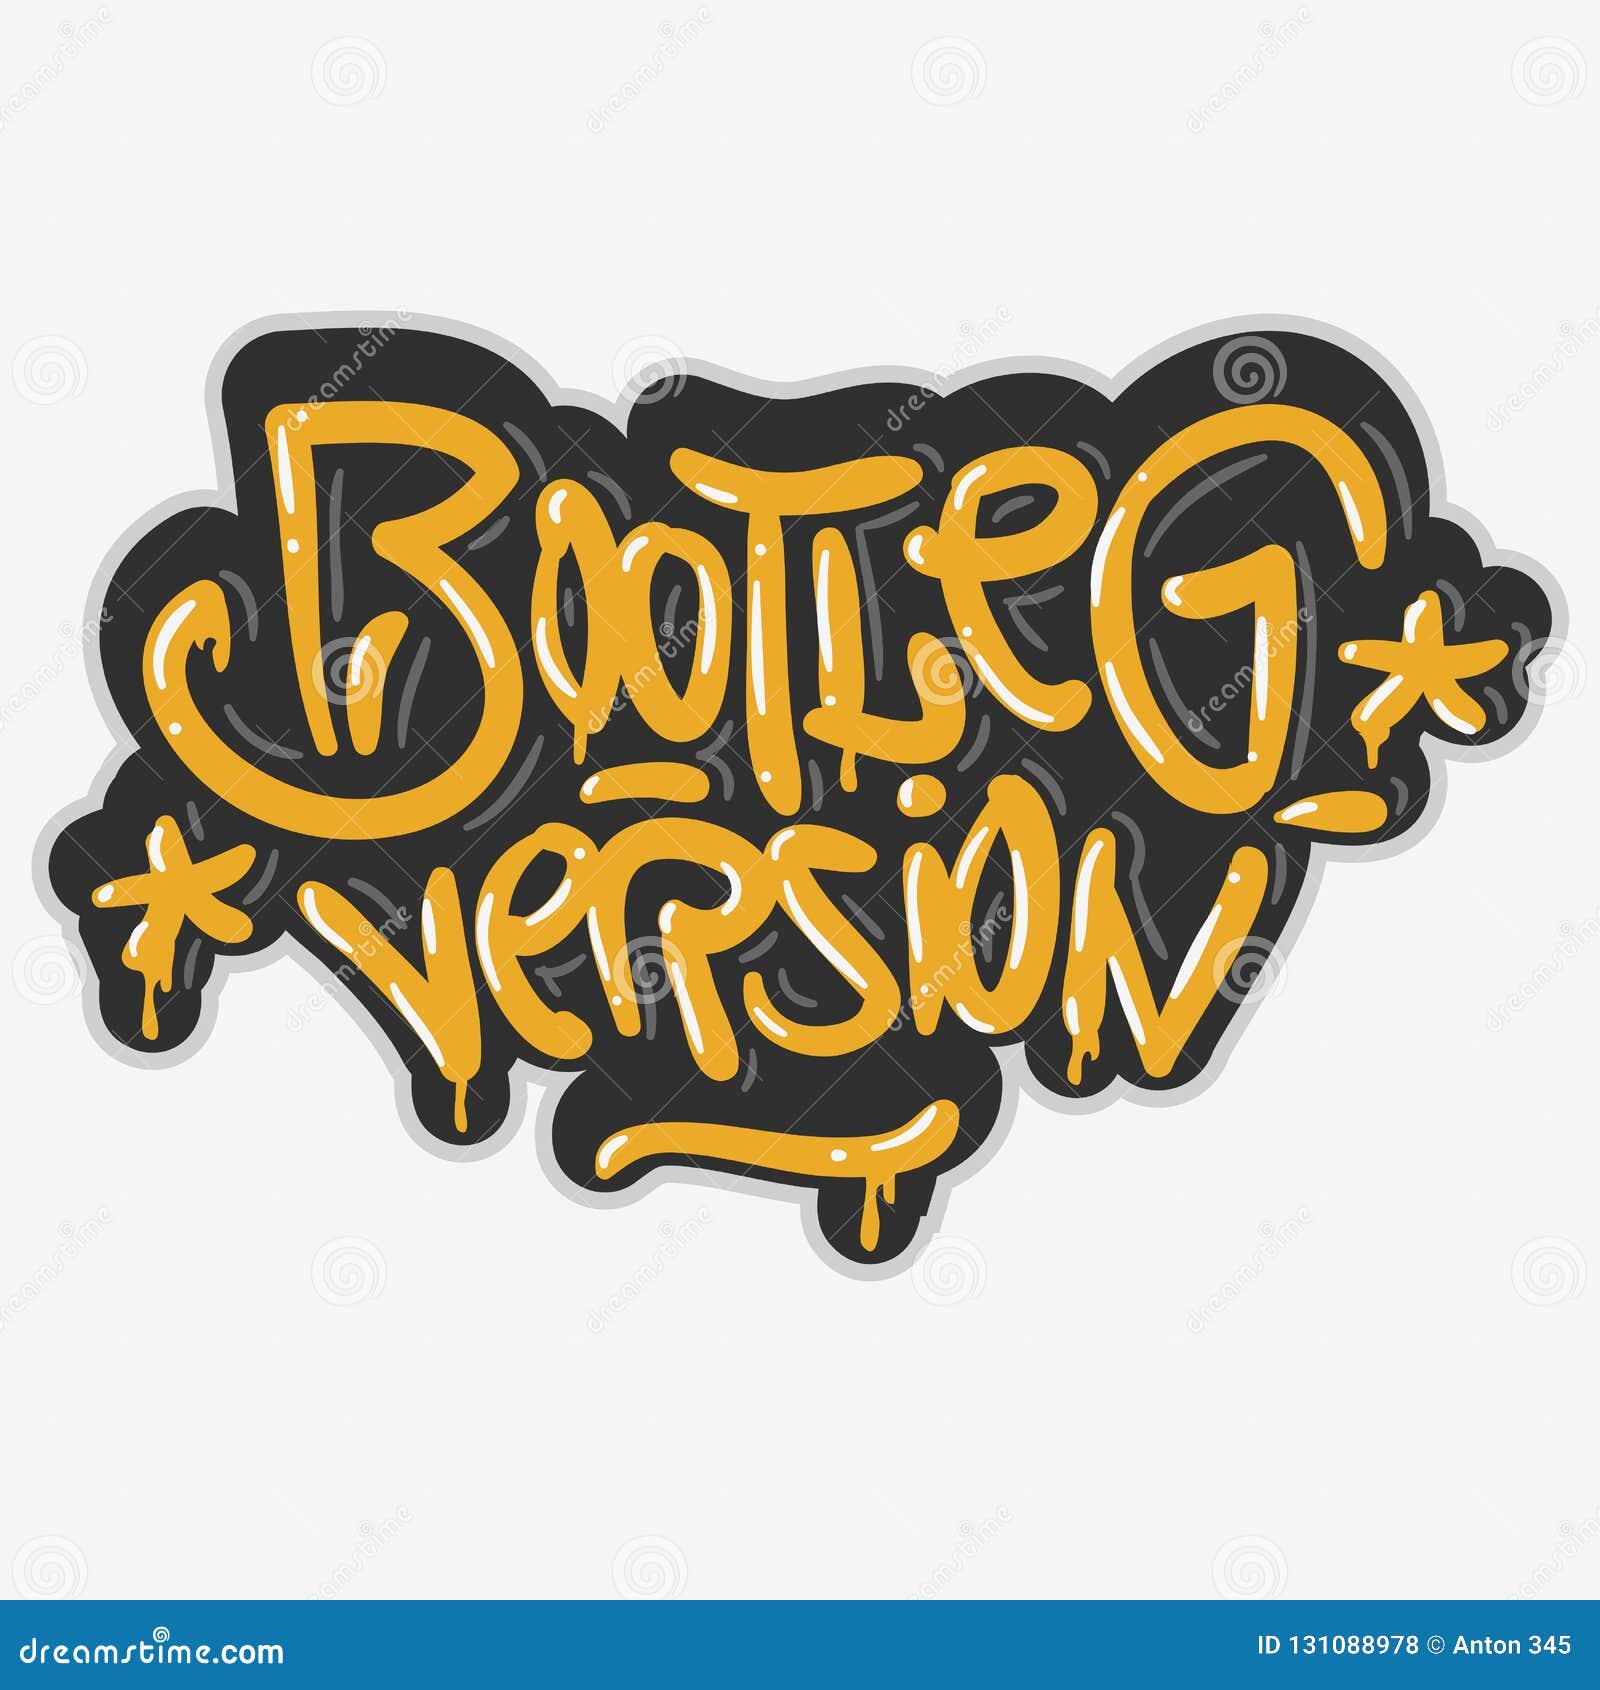 bootleg version hip hop related tag graffiti influenced label sign logo lettering for t-shirt or sticker on a whit